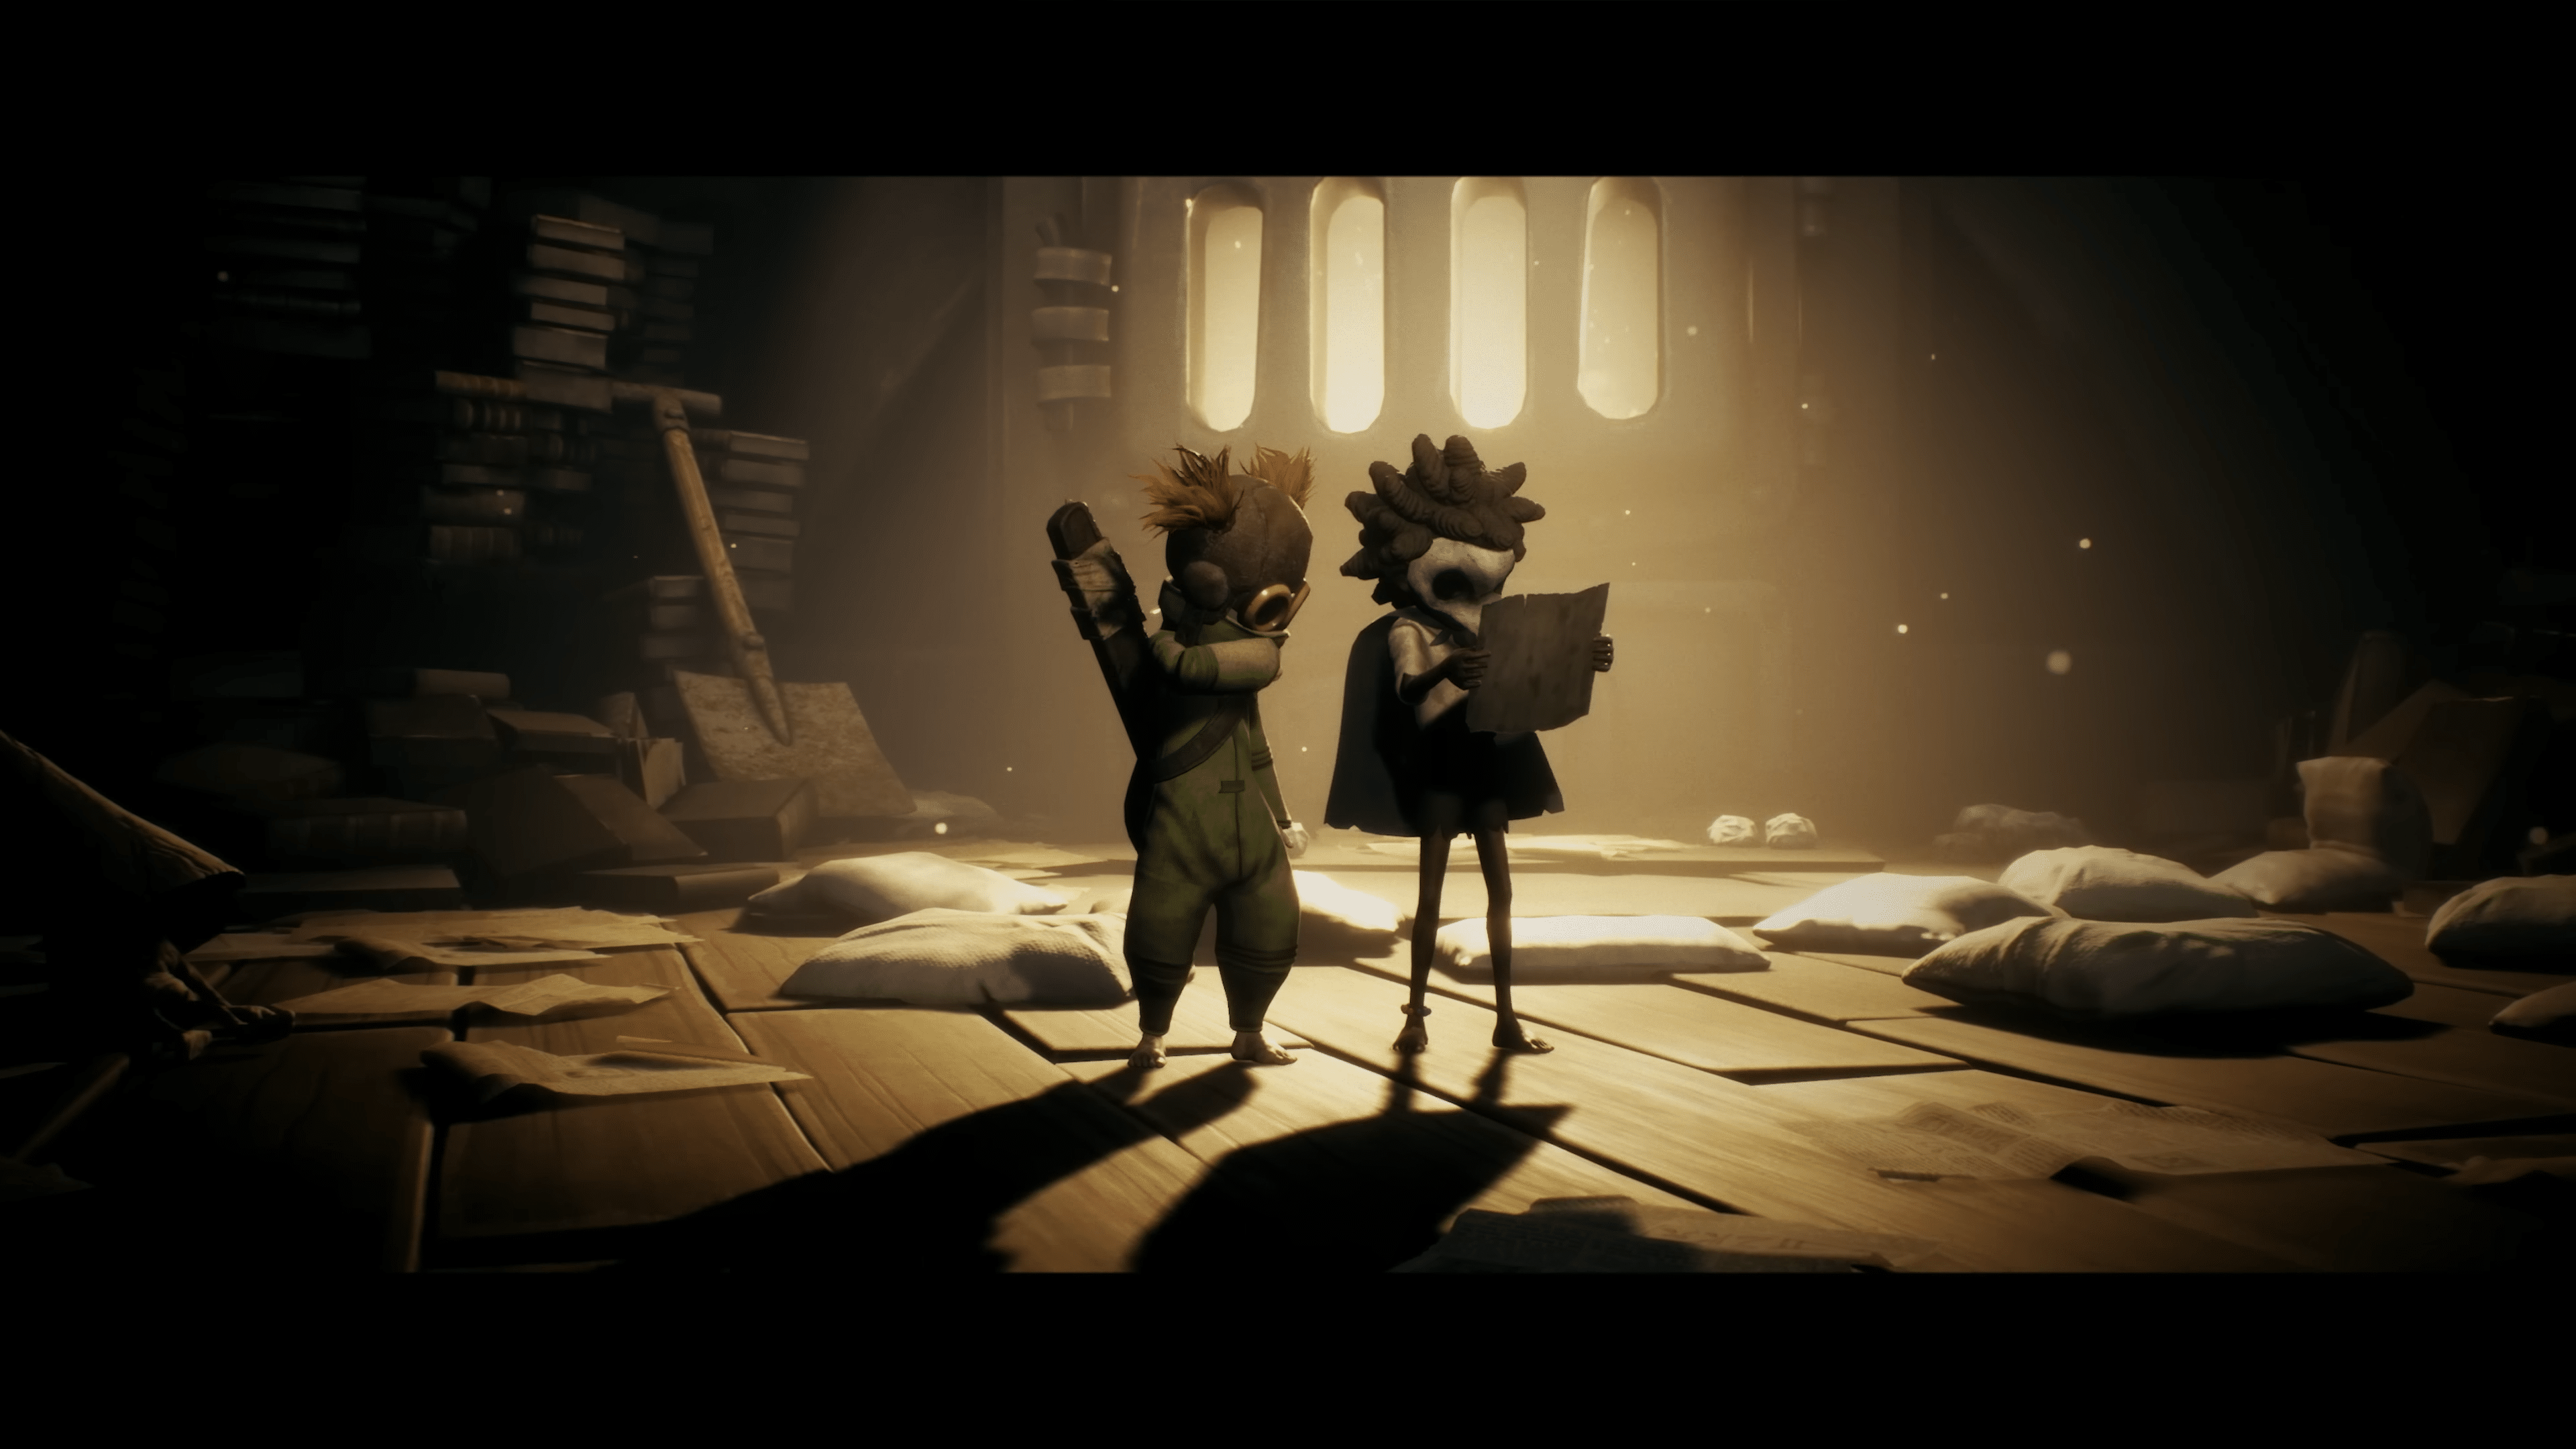 Little Nightmares 3 Revealed With New Haunting Trailer, Will Feature Co-Op